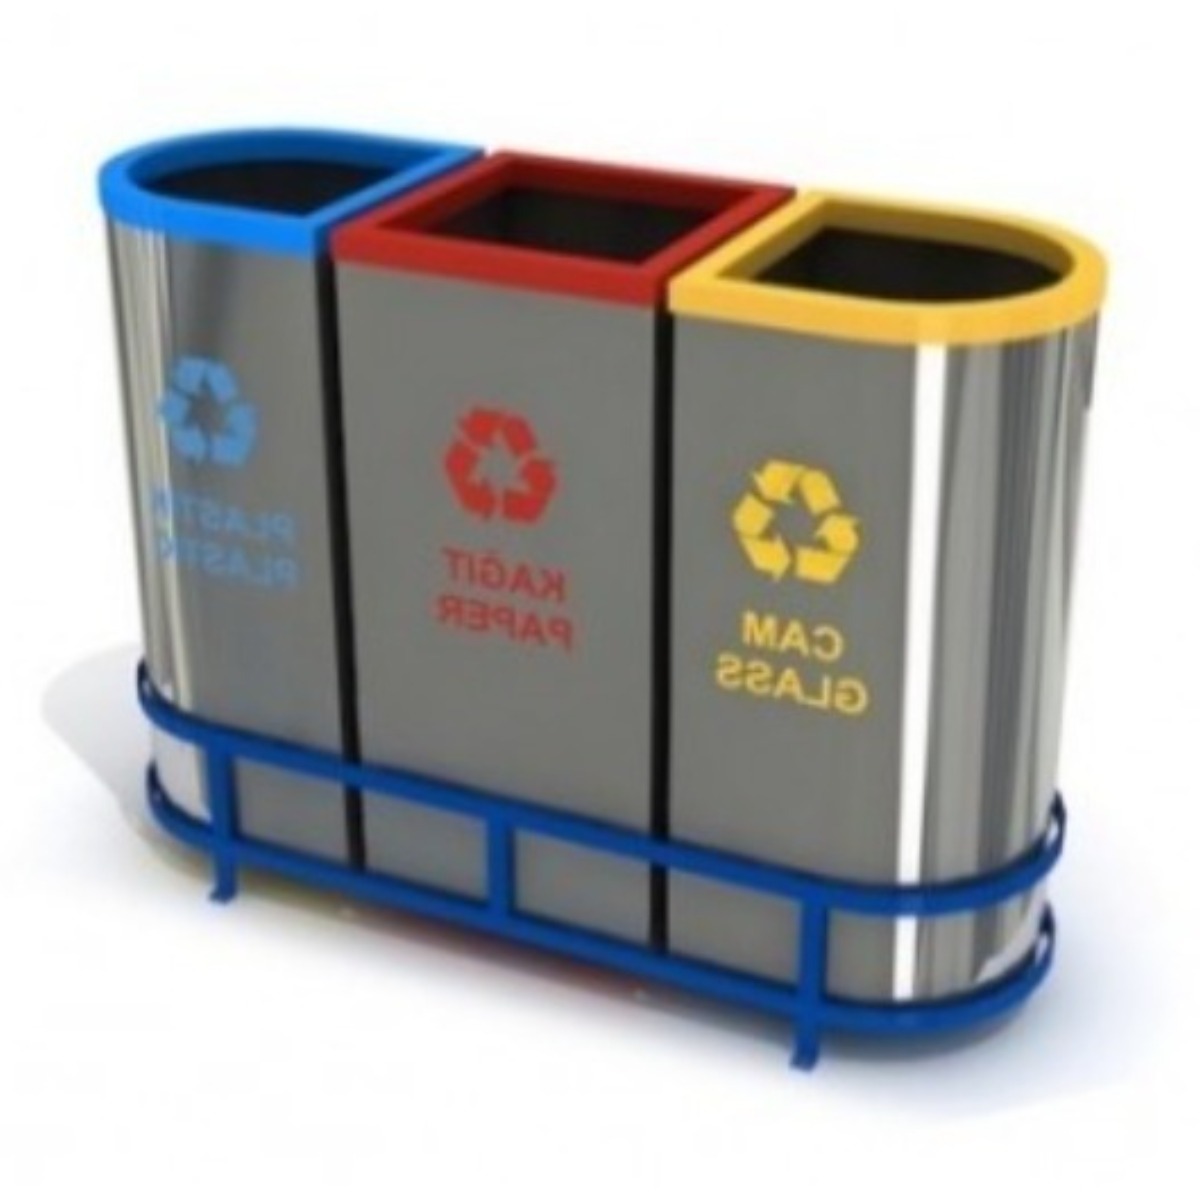 AB-789 3'Part Recycle Bin product logo